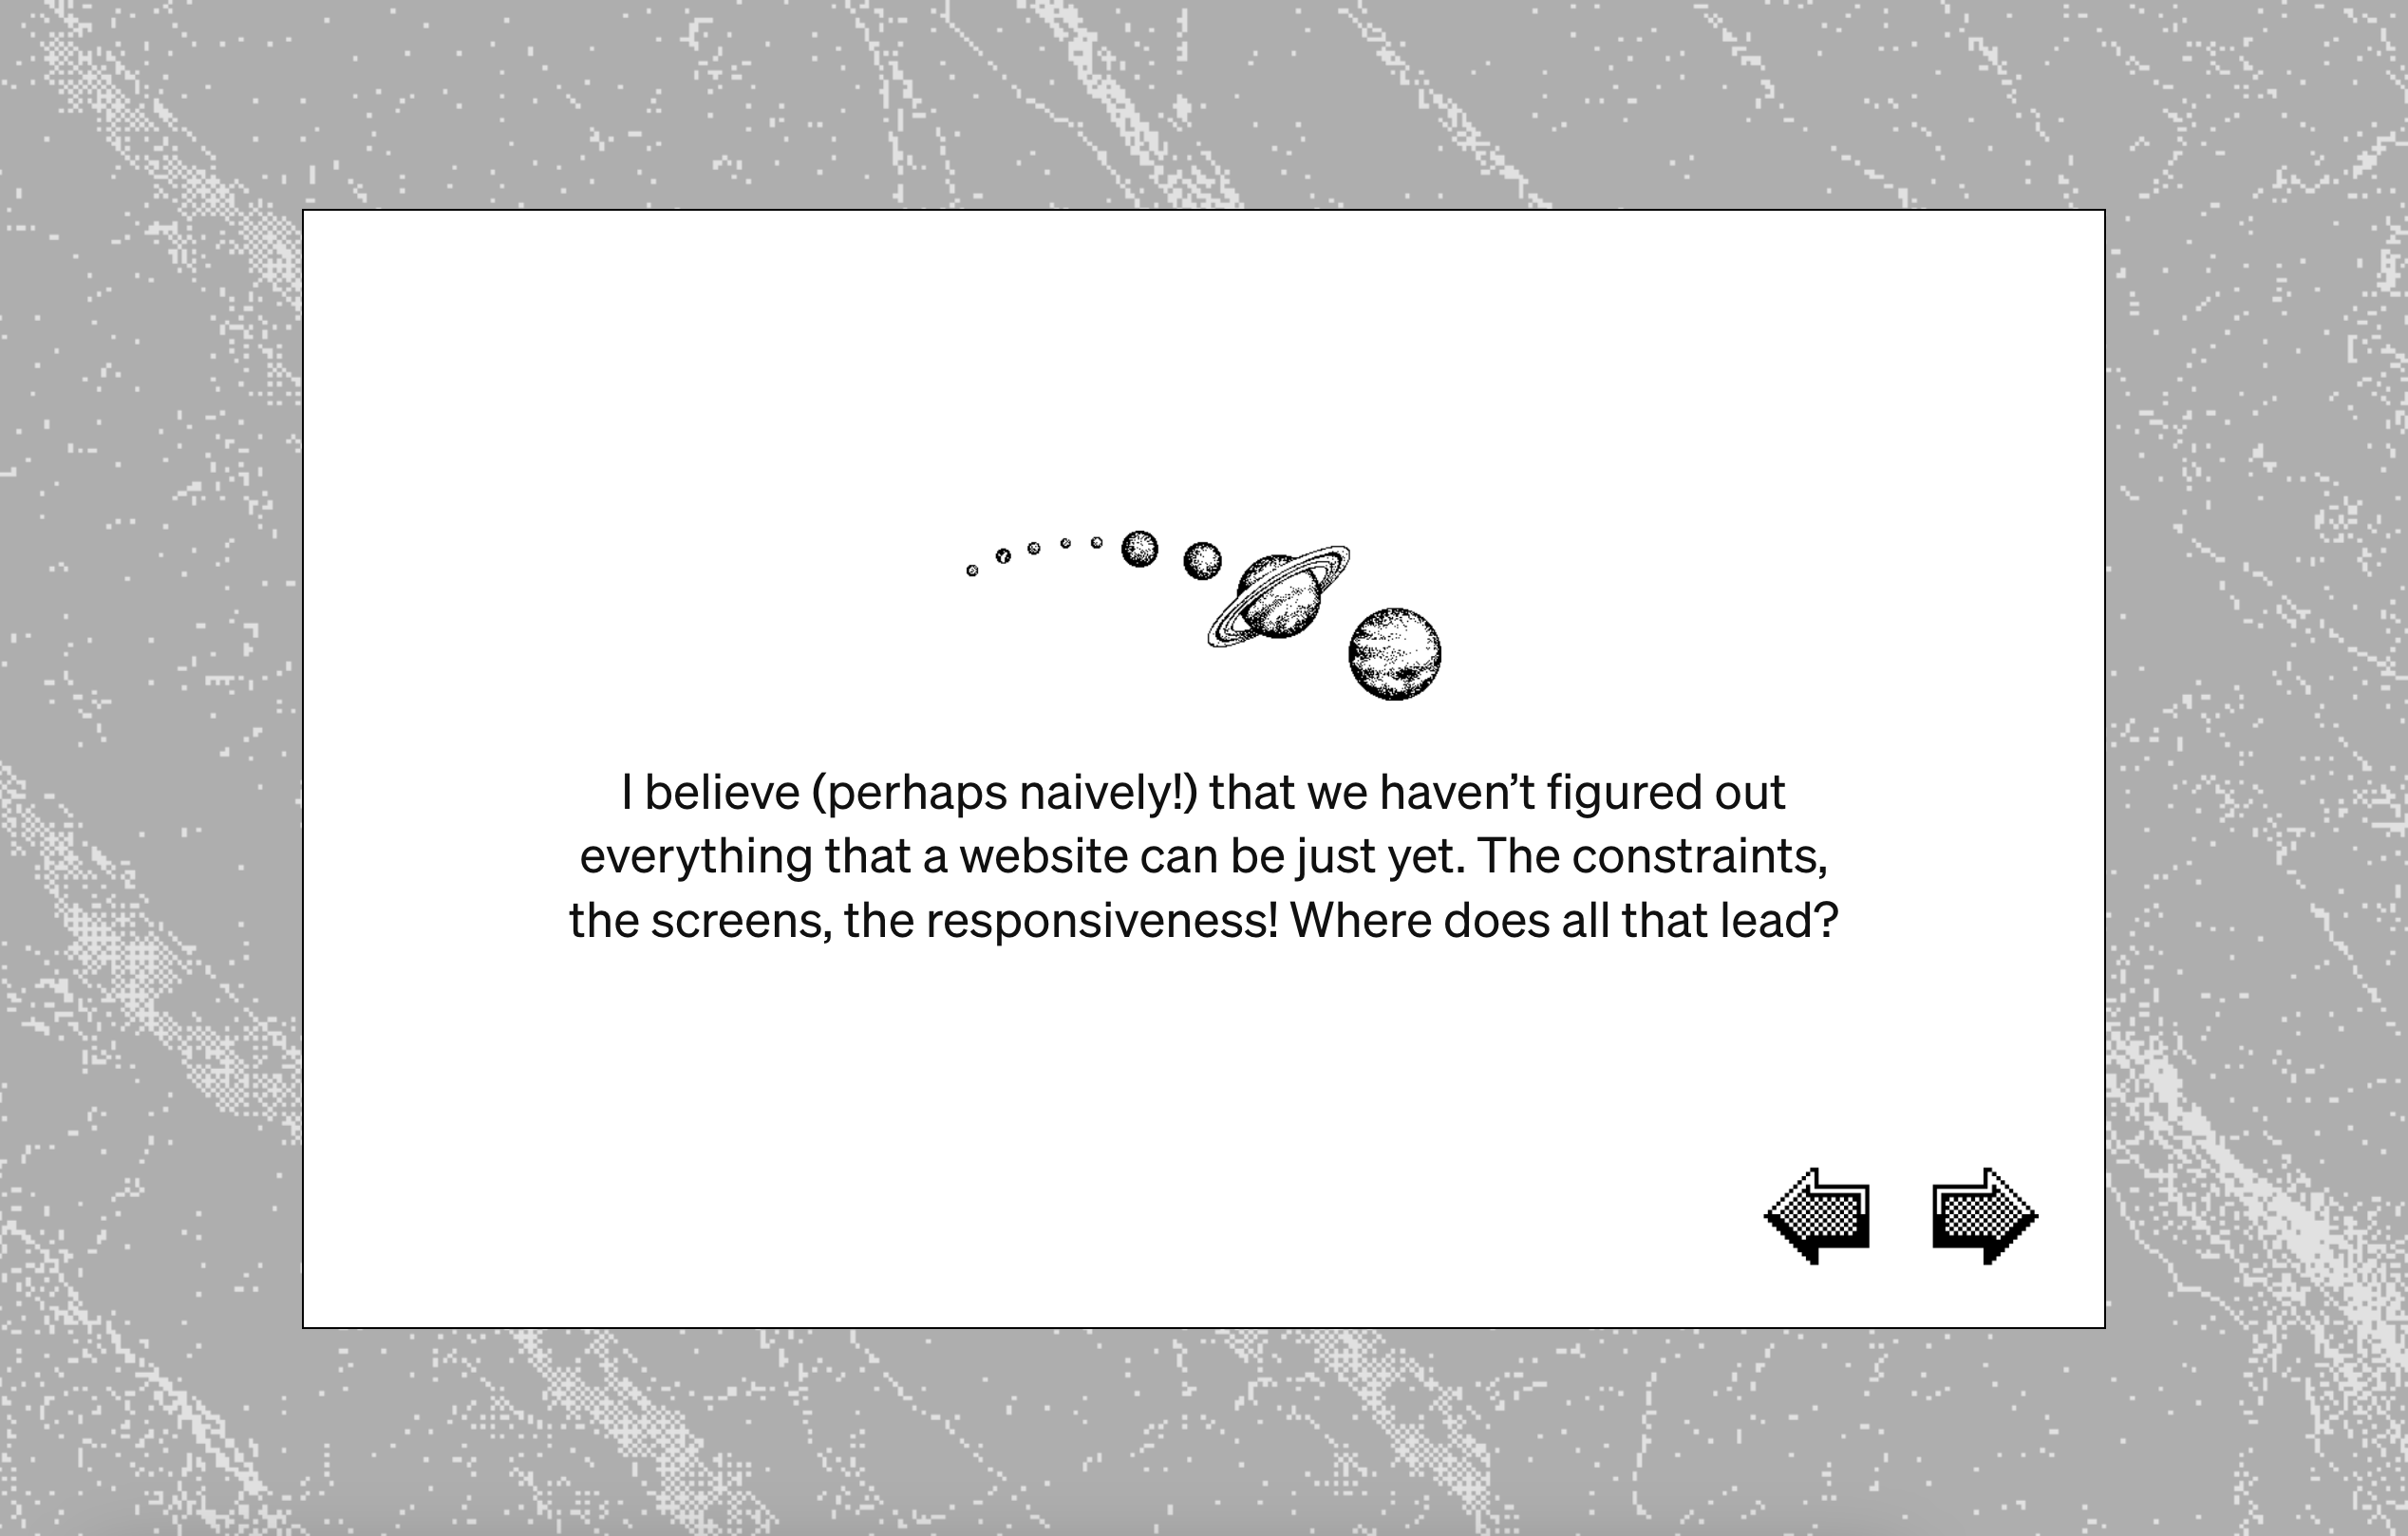 A screenshot of the project, showing a white card on a pixelated marble background